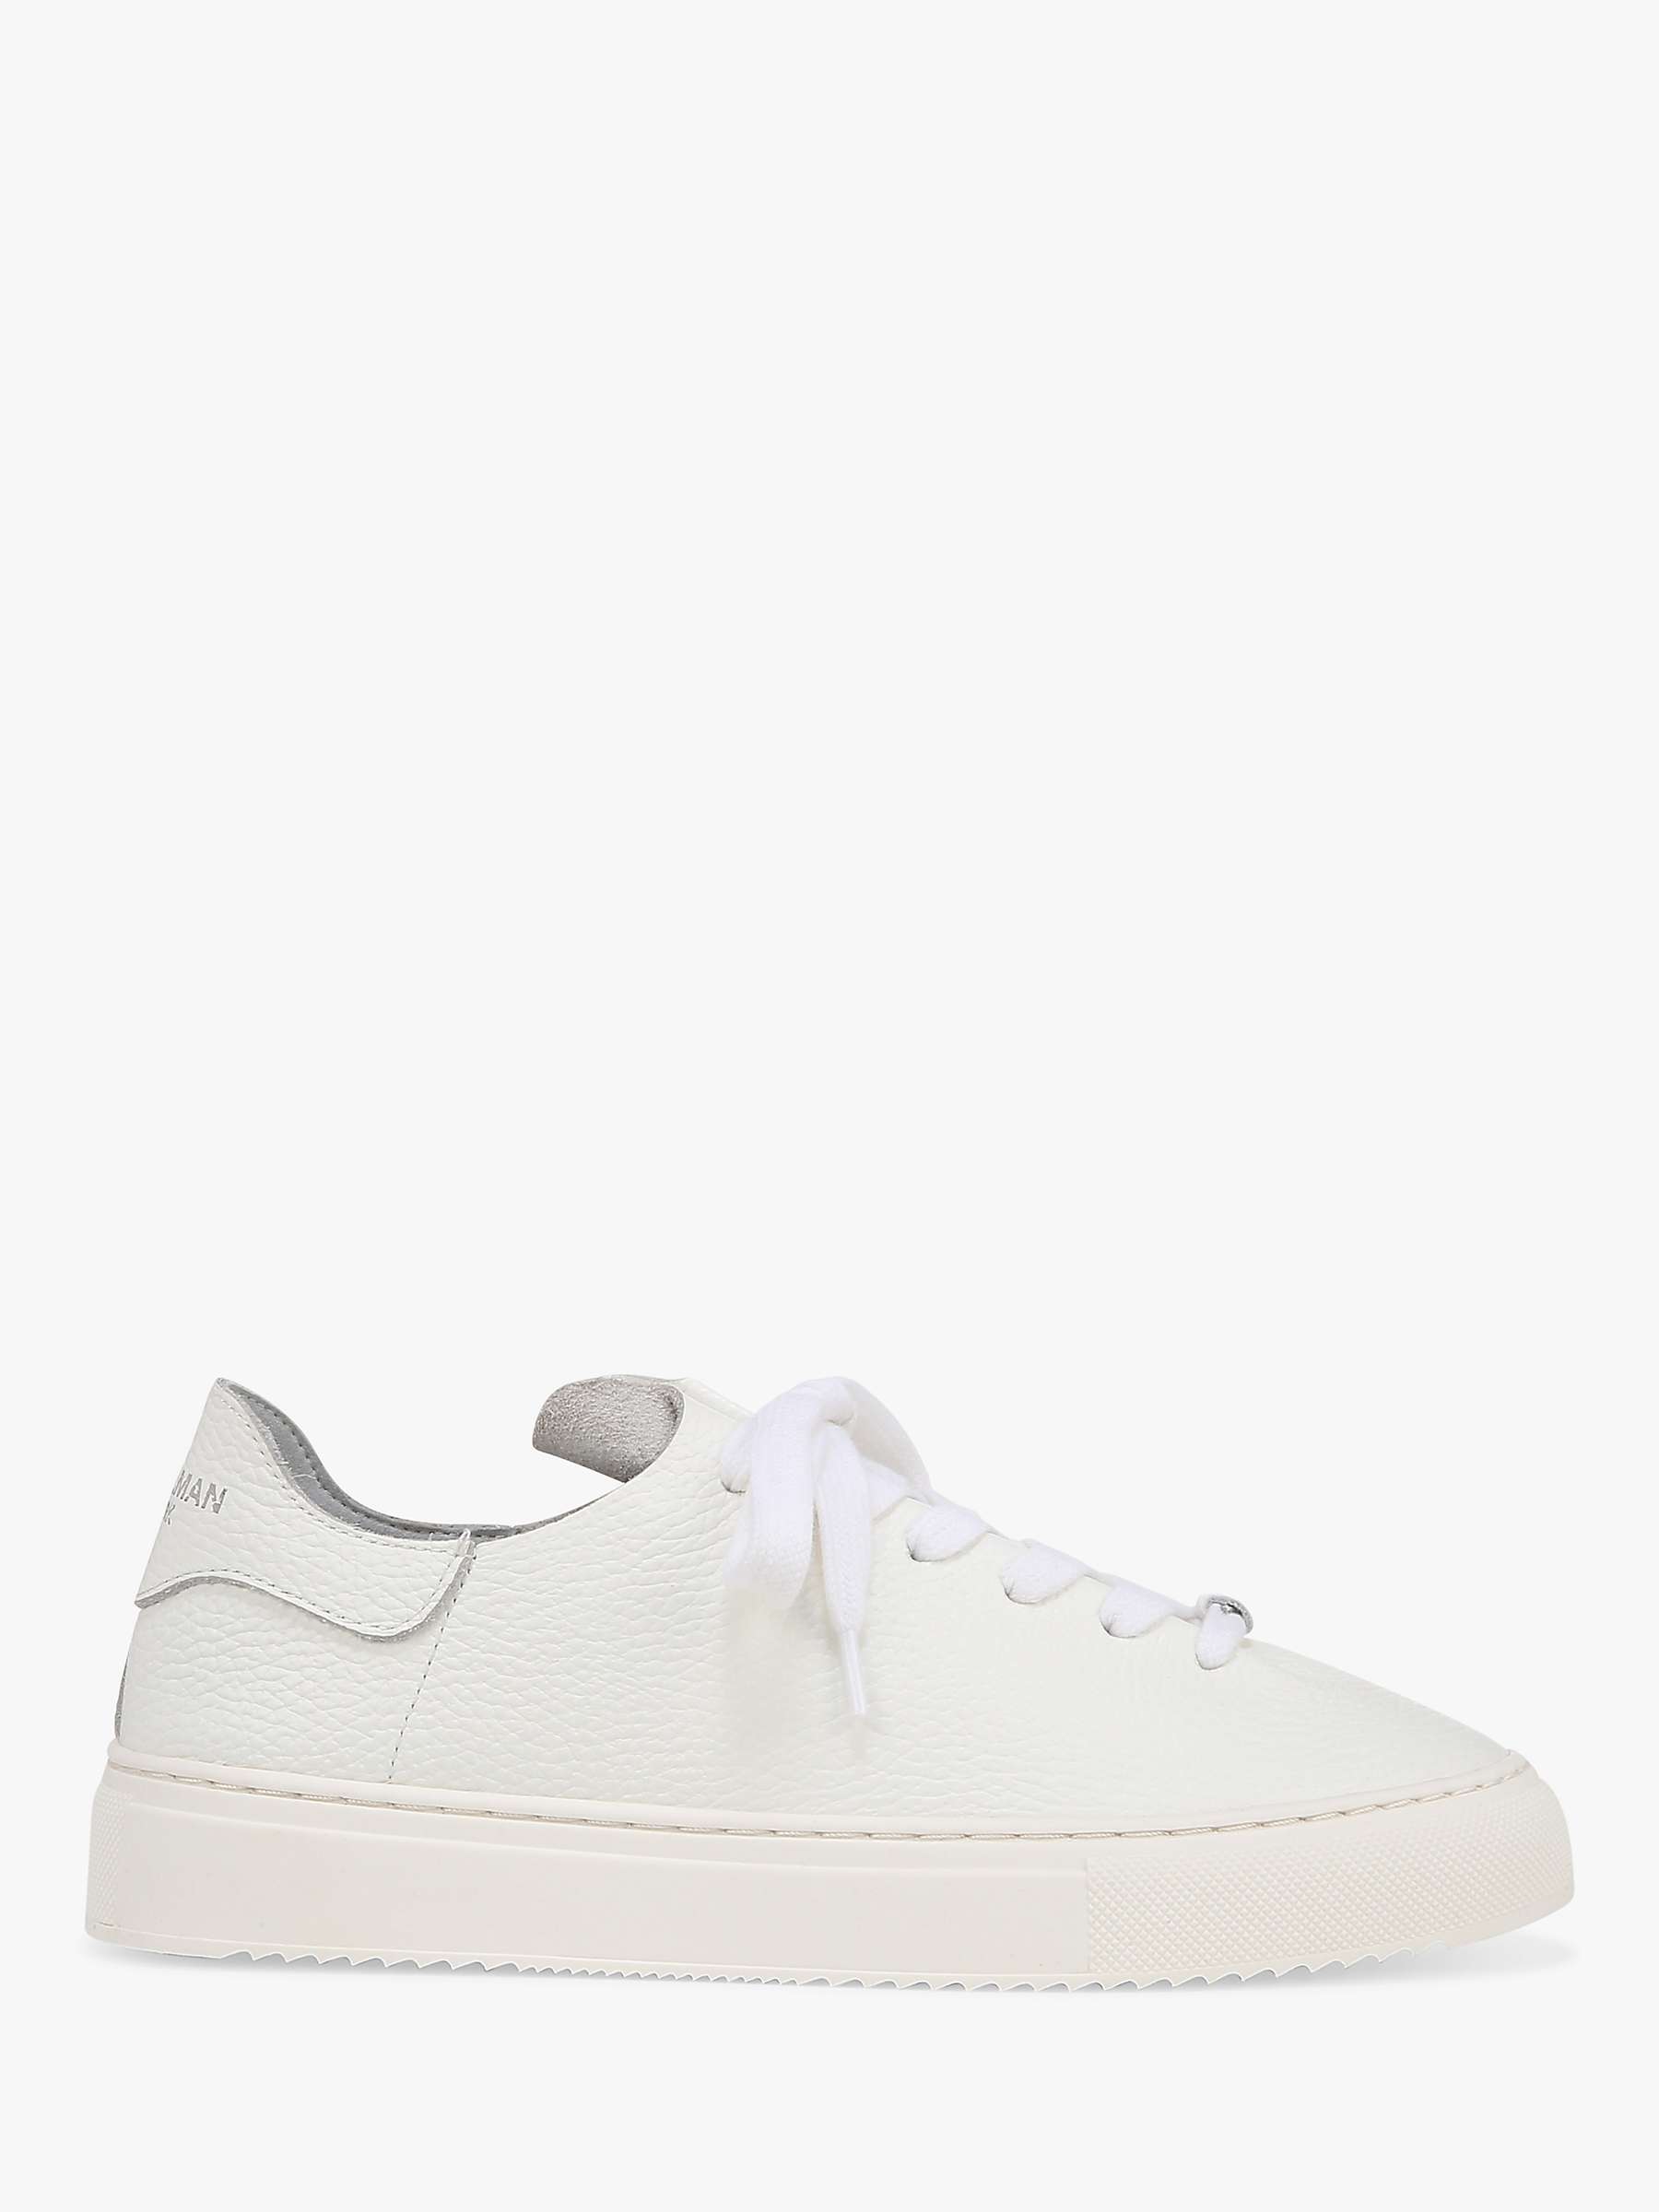 Buy Sam Edelman Poppy Leather Trainers Online at johnlewis.com